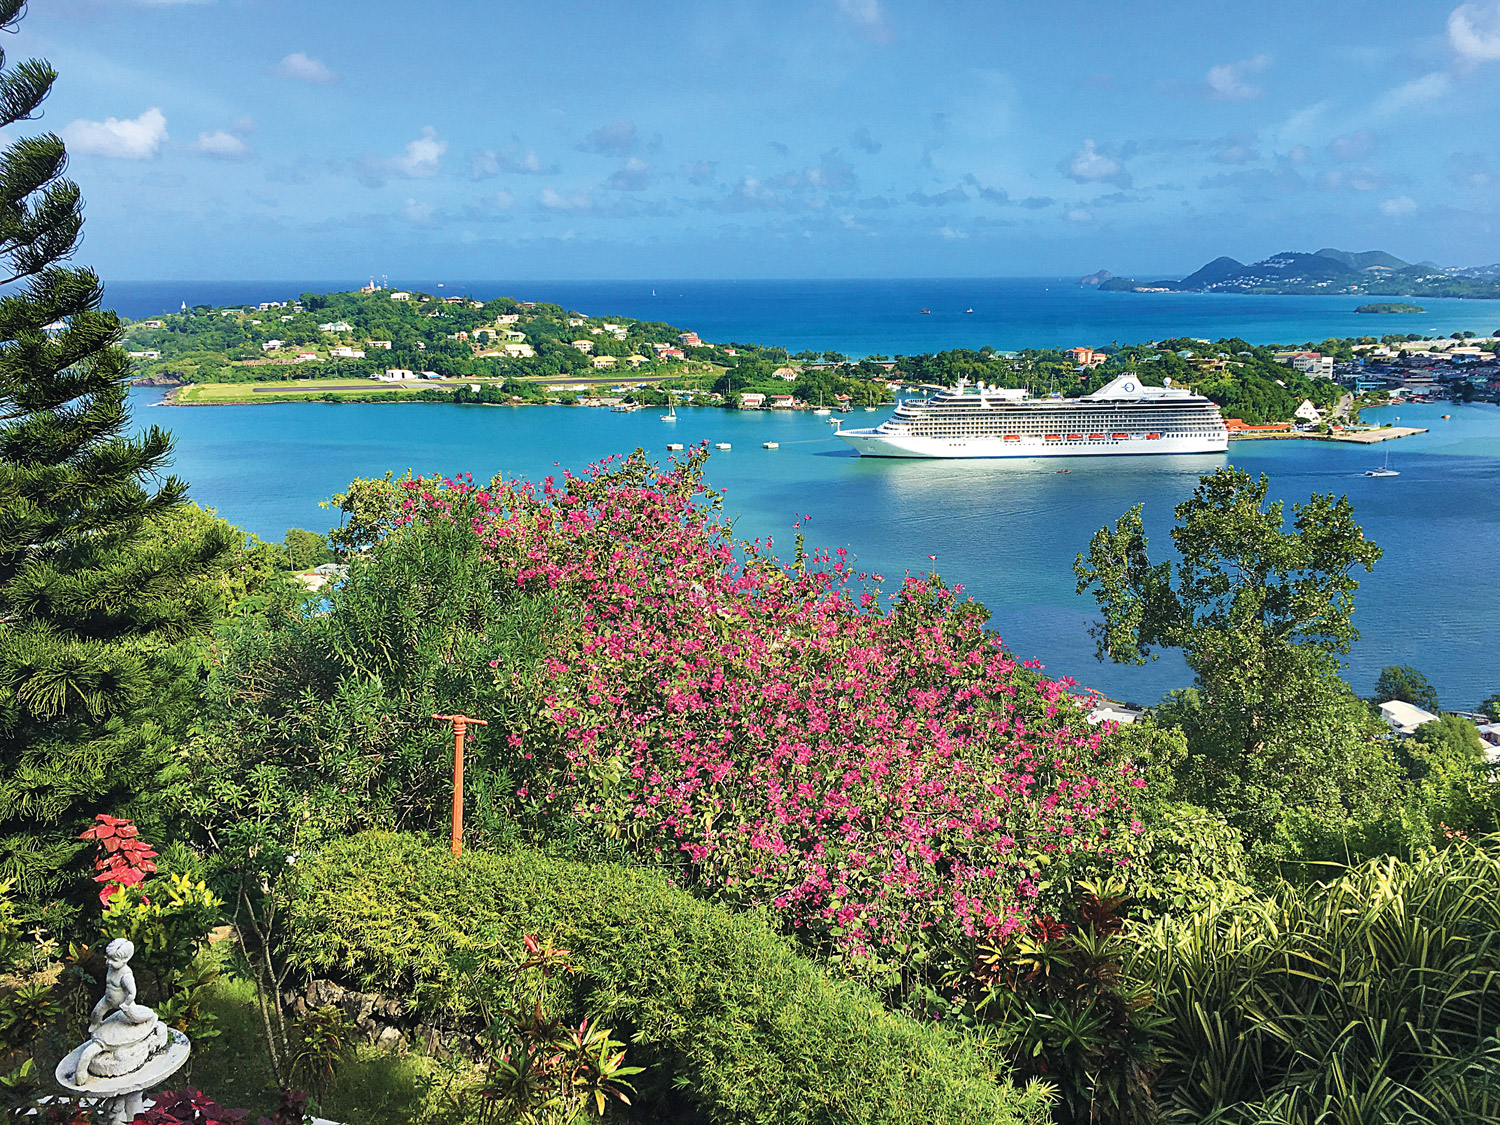 Oceania Cruises Offers a Taste of the Tropics With a Collection of Voyages Sailing Exotic Tahiti and the Caribbean